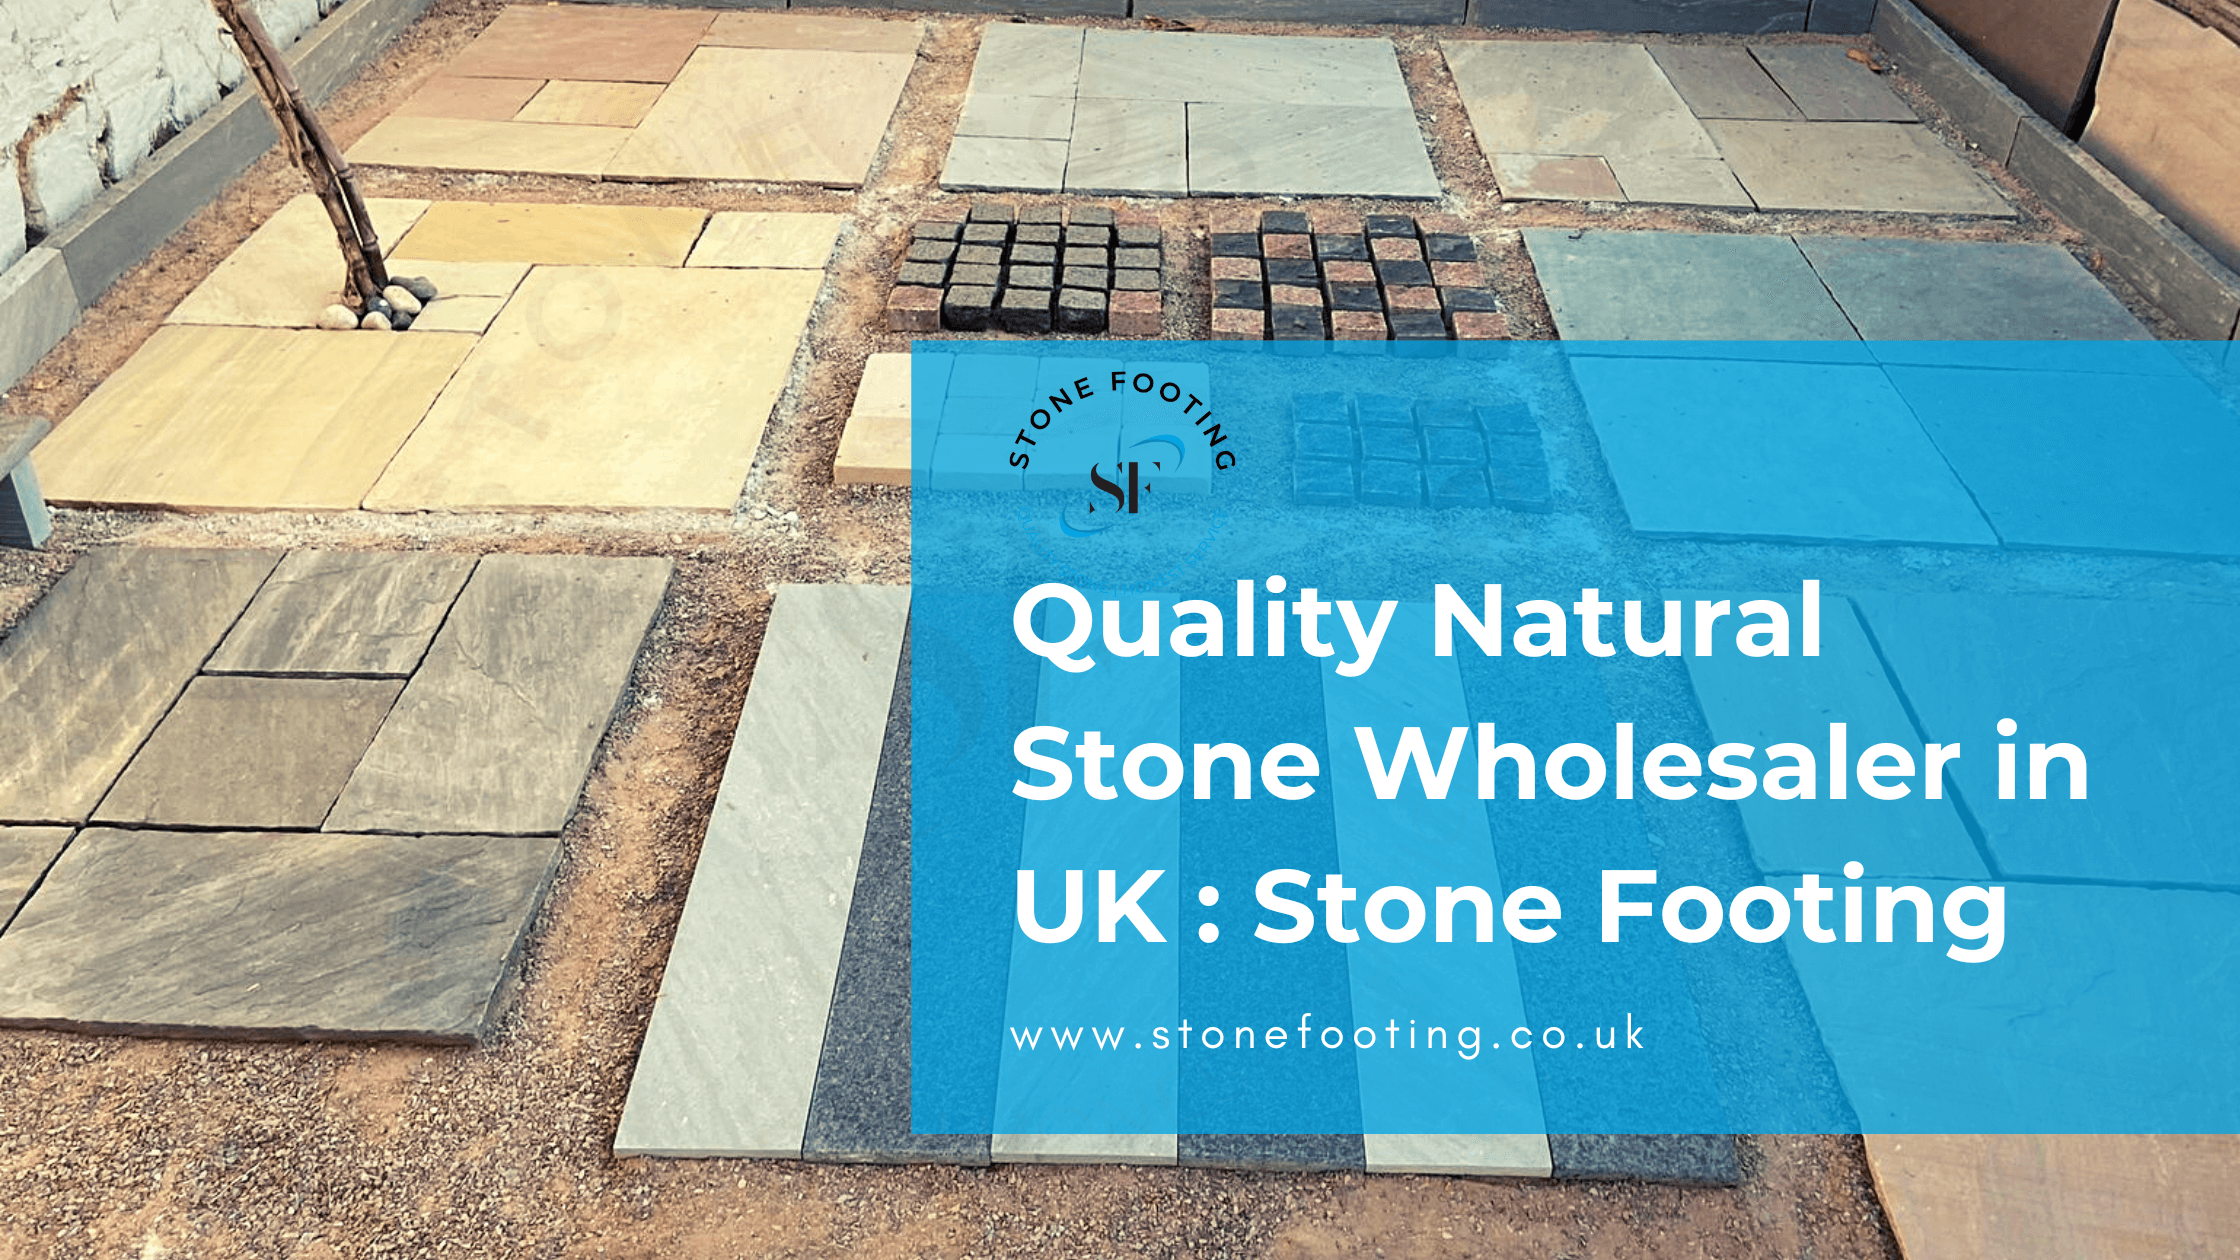 Stone Footing -Quality Natural Stone Wholesaler in UK